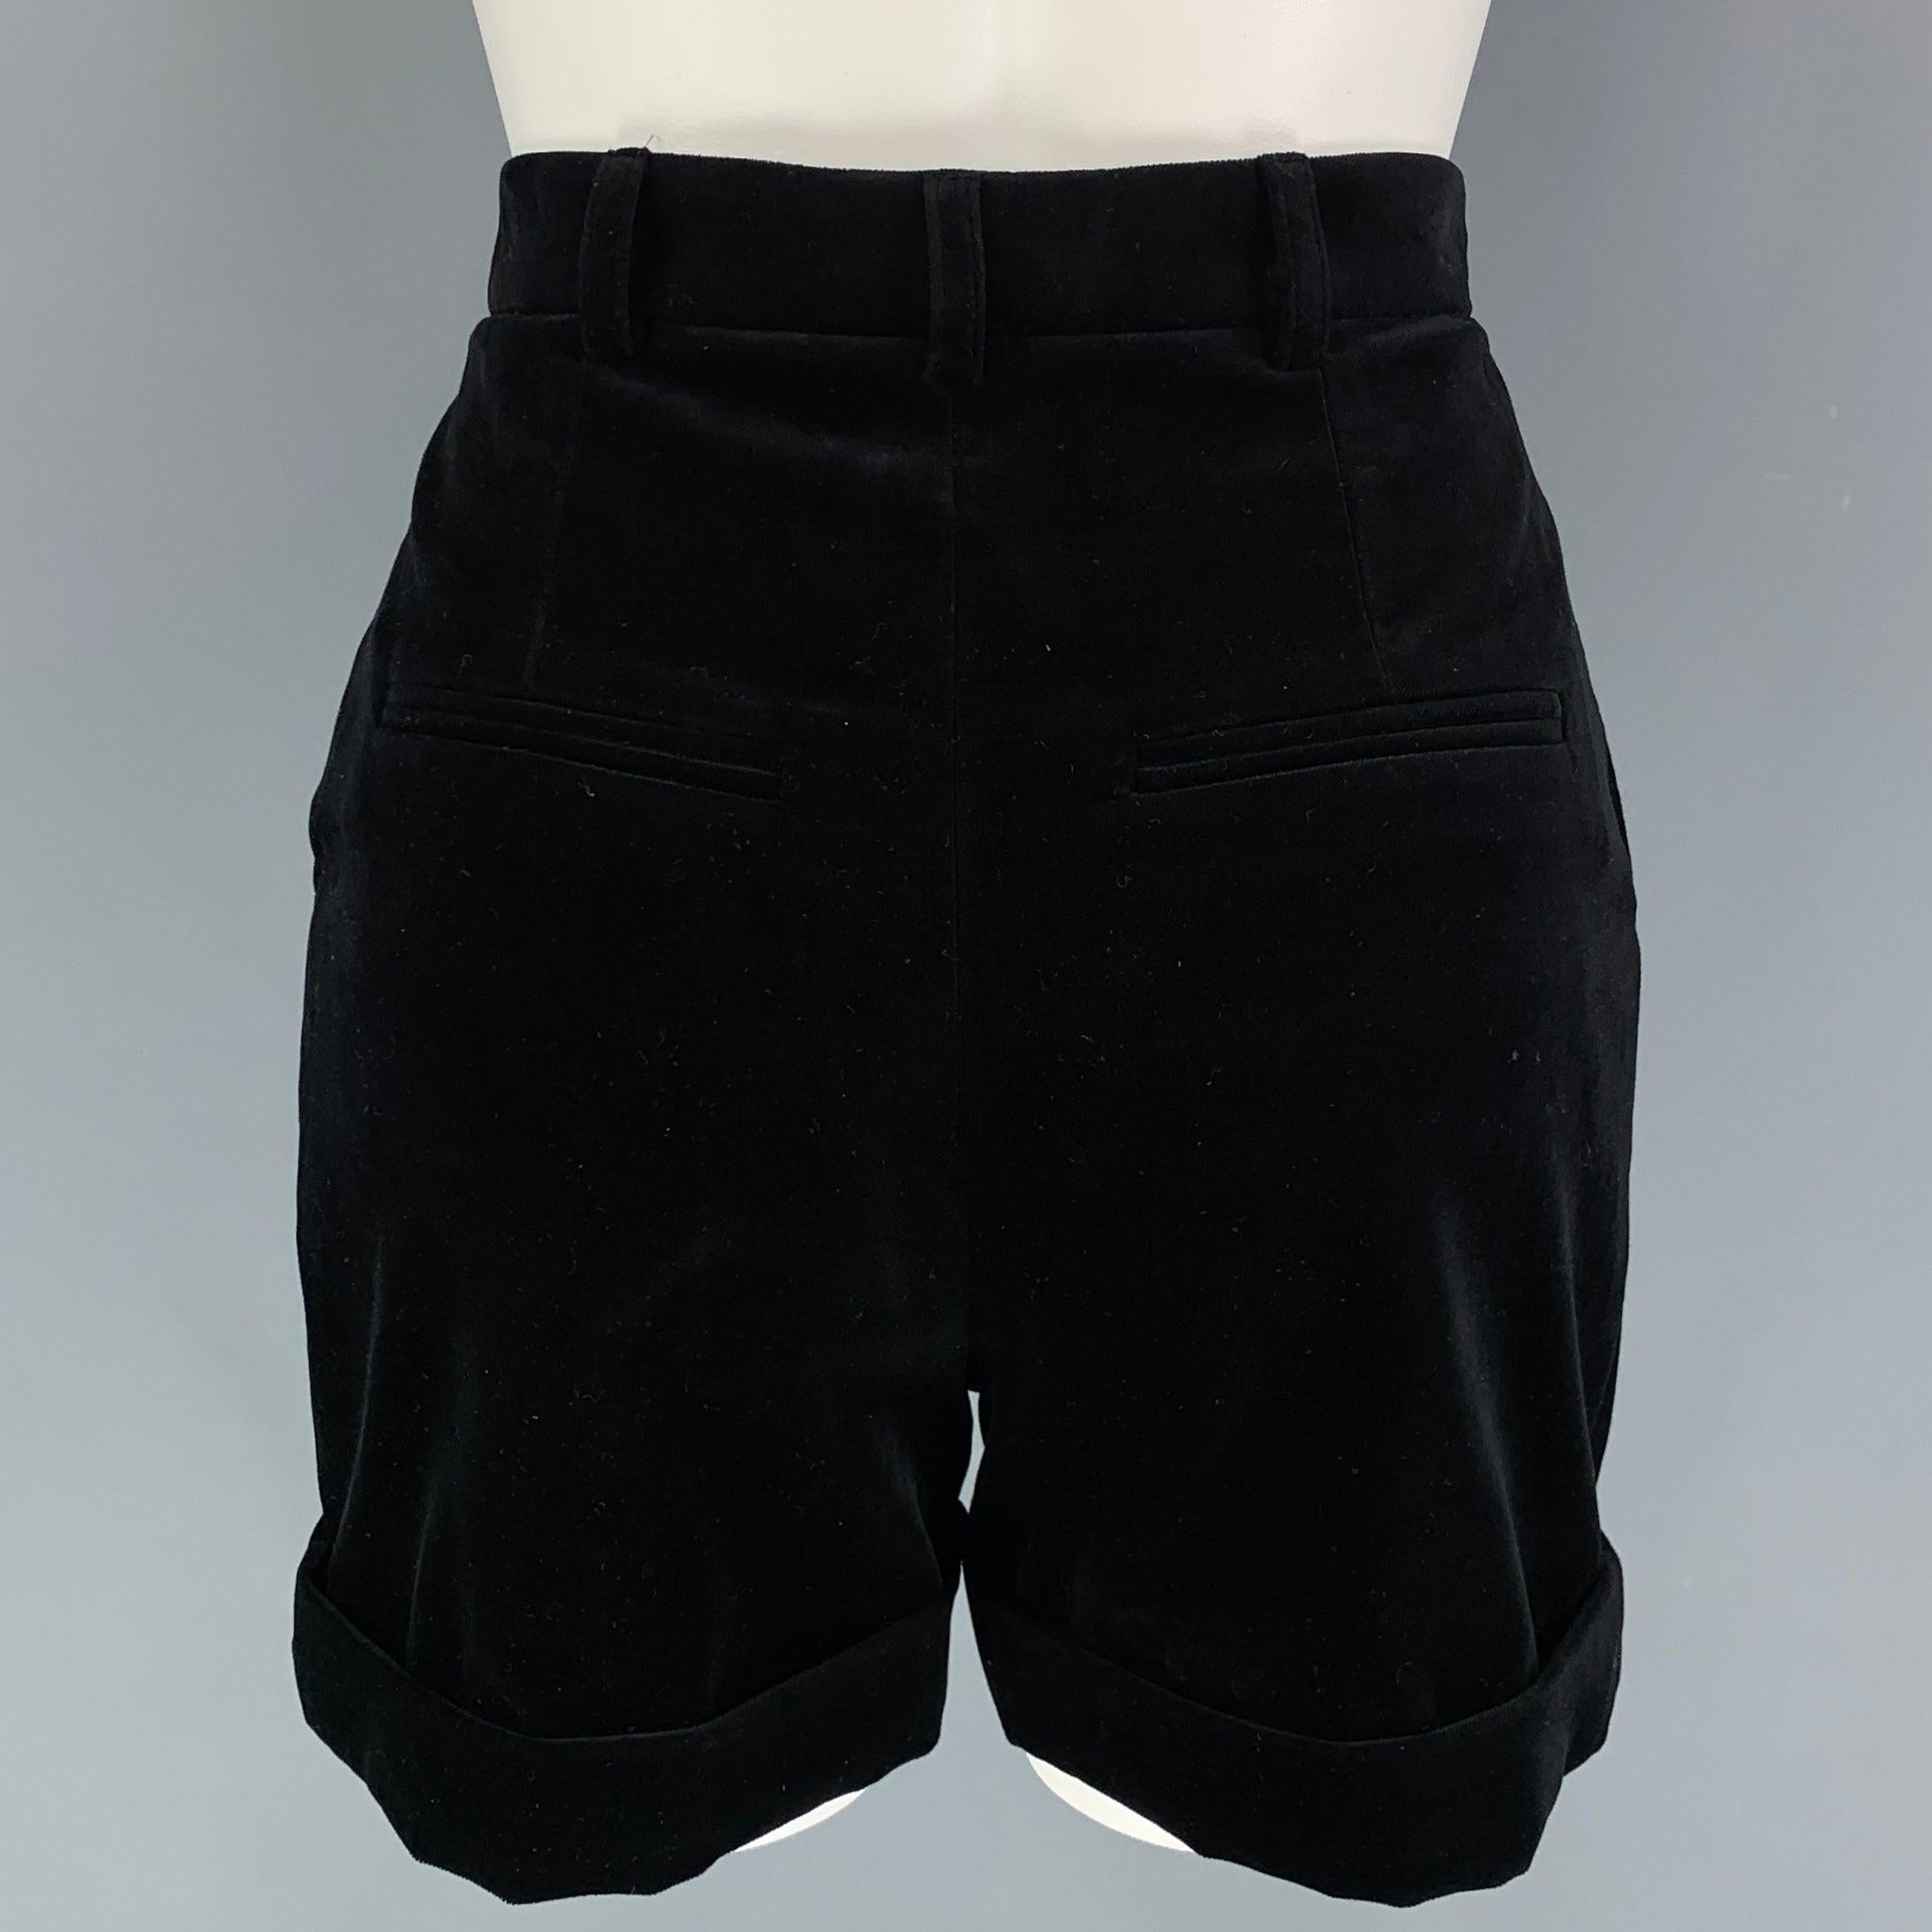 SAINT LAURENT shorts comes in black cotton featuring a high waist, pleated, cuffed, front tab, and a zip fly closure. Made in Italy.
Excellent
Pre-Owned Condition. 

Marked:   F 34 

Measurements: 
  Waist: 24 inches  Rise: 12 inches  Inseam: 4.5